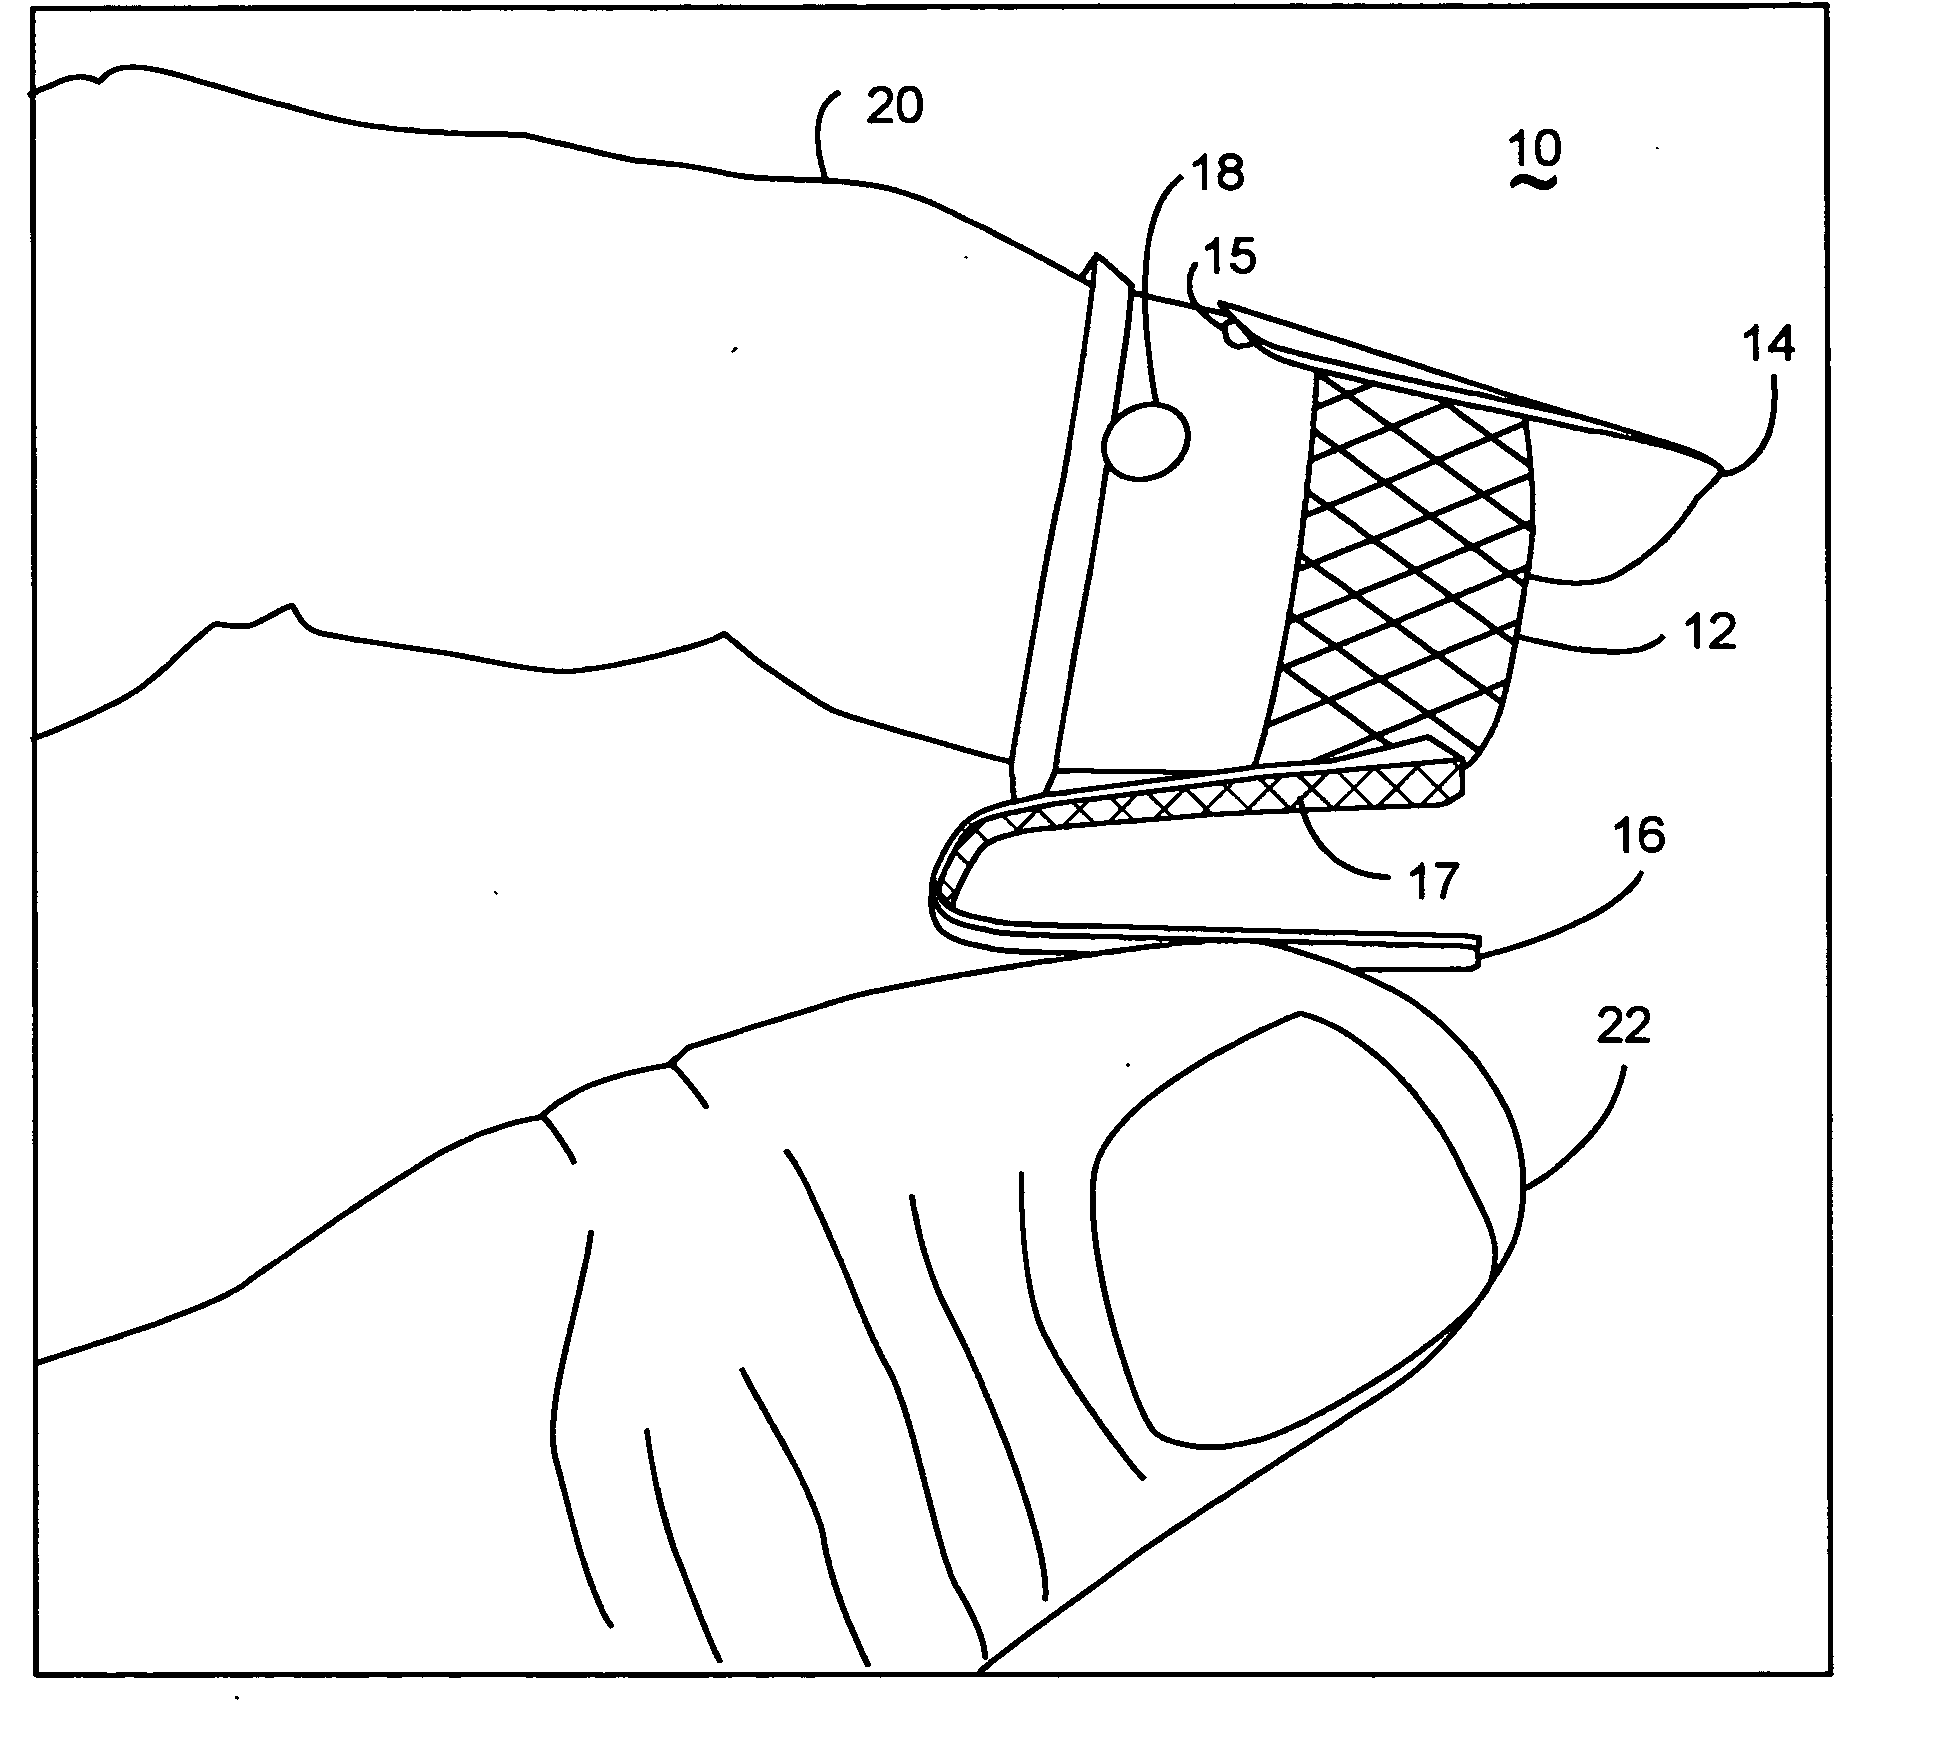 Fisherperson's tool for using slotted weights with a fishing line